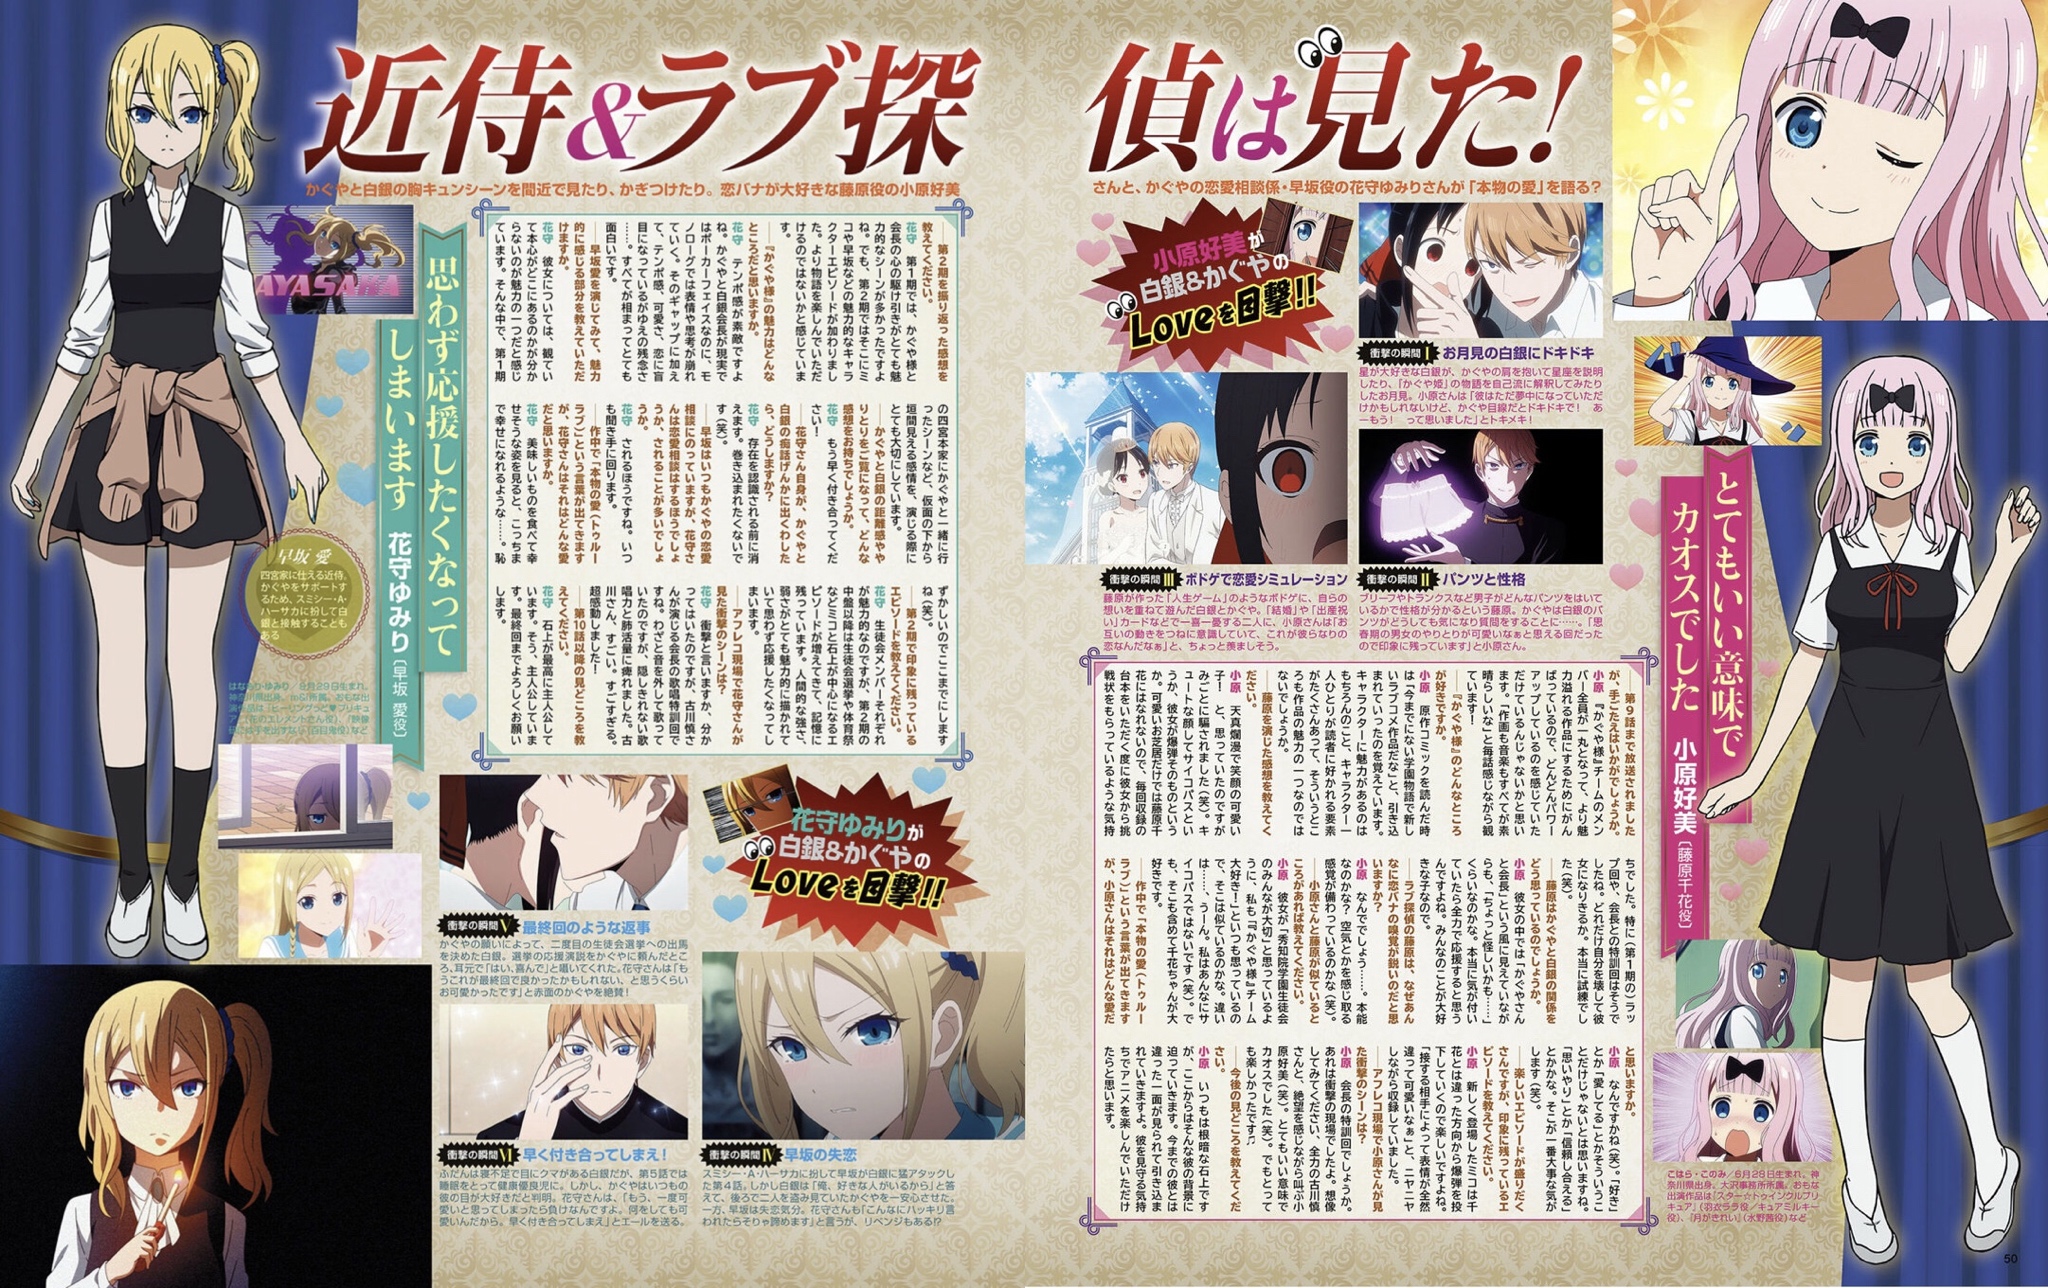 Kaguya Voice Actors Interview From Animage July 2020